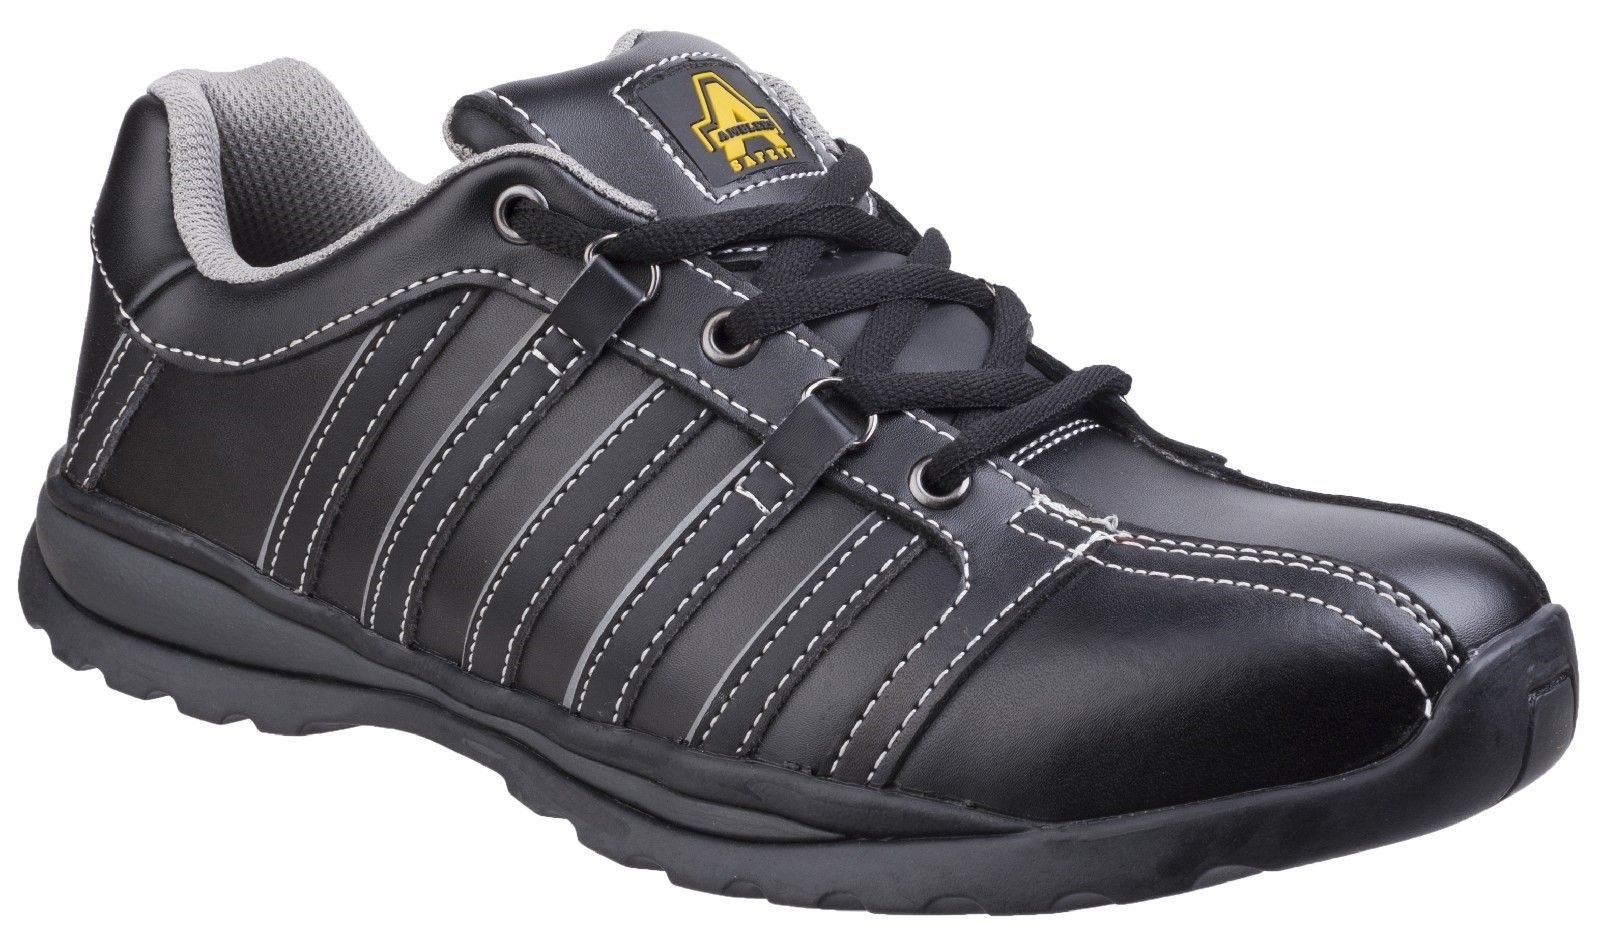 A light weight safety shoe with rubber sole to 300 degrees, heat resistance, SRC slip and anti-static penetration protection sole.Stylish safety trainer with steel toe cap and midsole protection. 
Black leather upper with smooth leather overlays and silver highlights. 
Unique lace up front with alternating eyelets and D-Ring lace holds. 
Comfortably lined with padded textile mesh lining. 
Removable EVA insole.